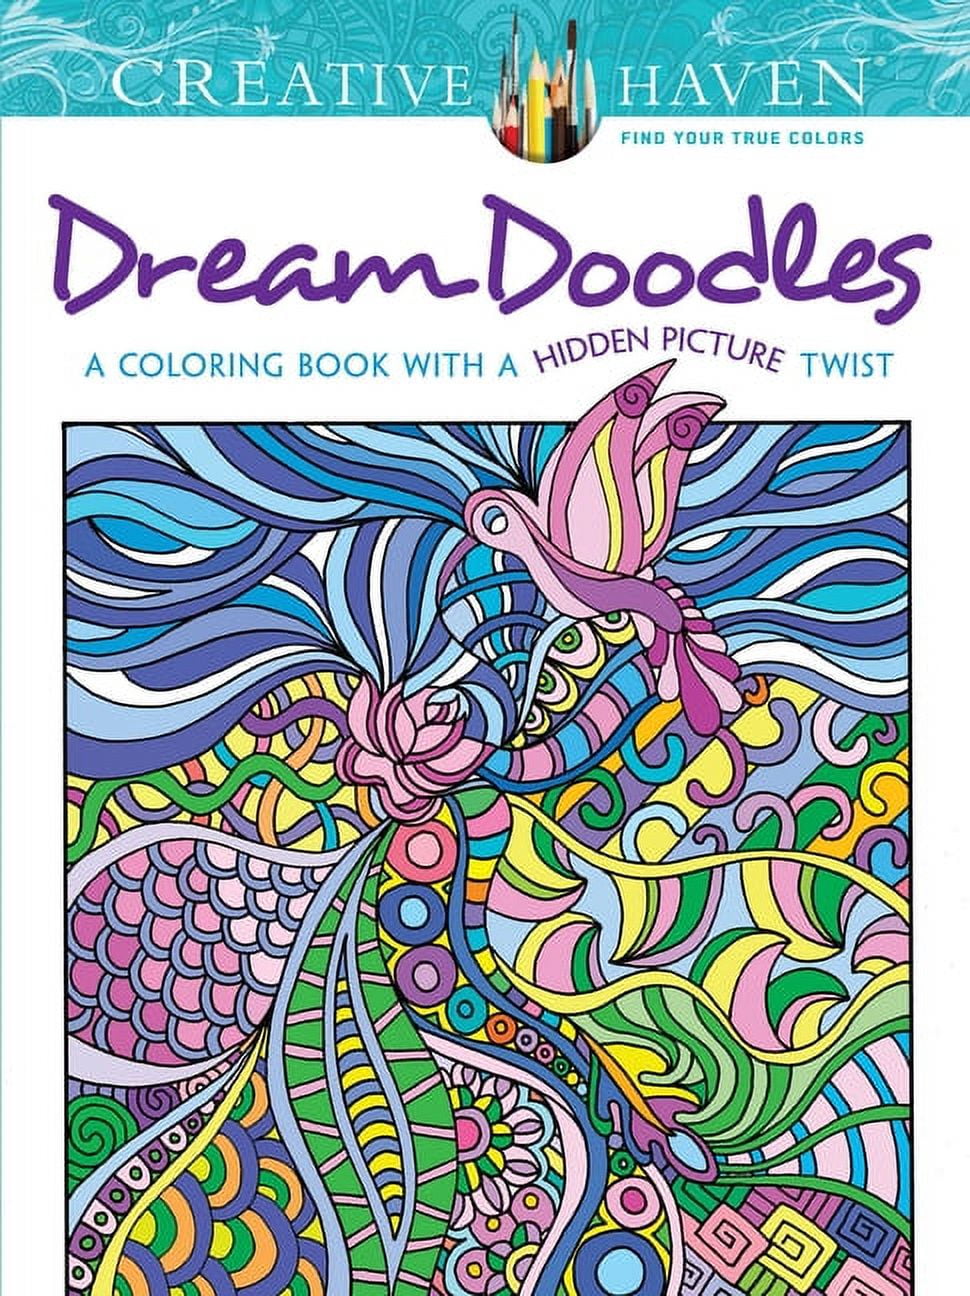 Incredibly Detailed Coloring Books For Adults Called 'Doodle